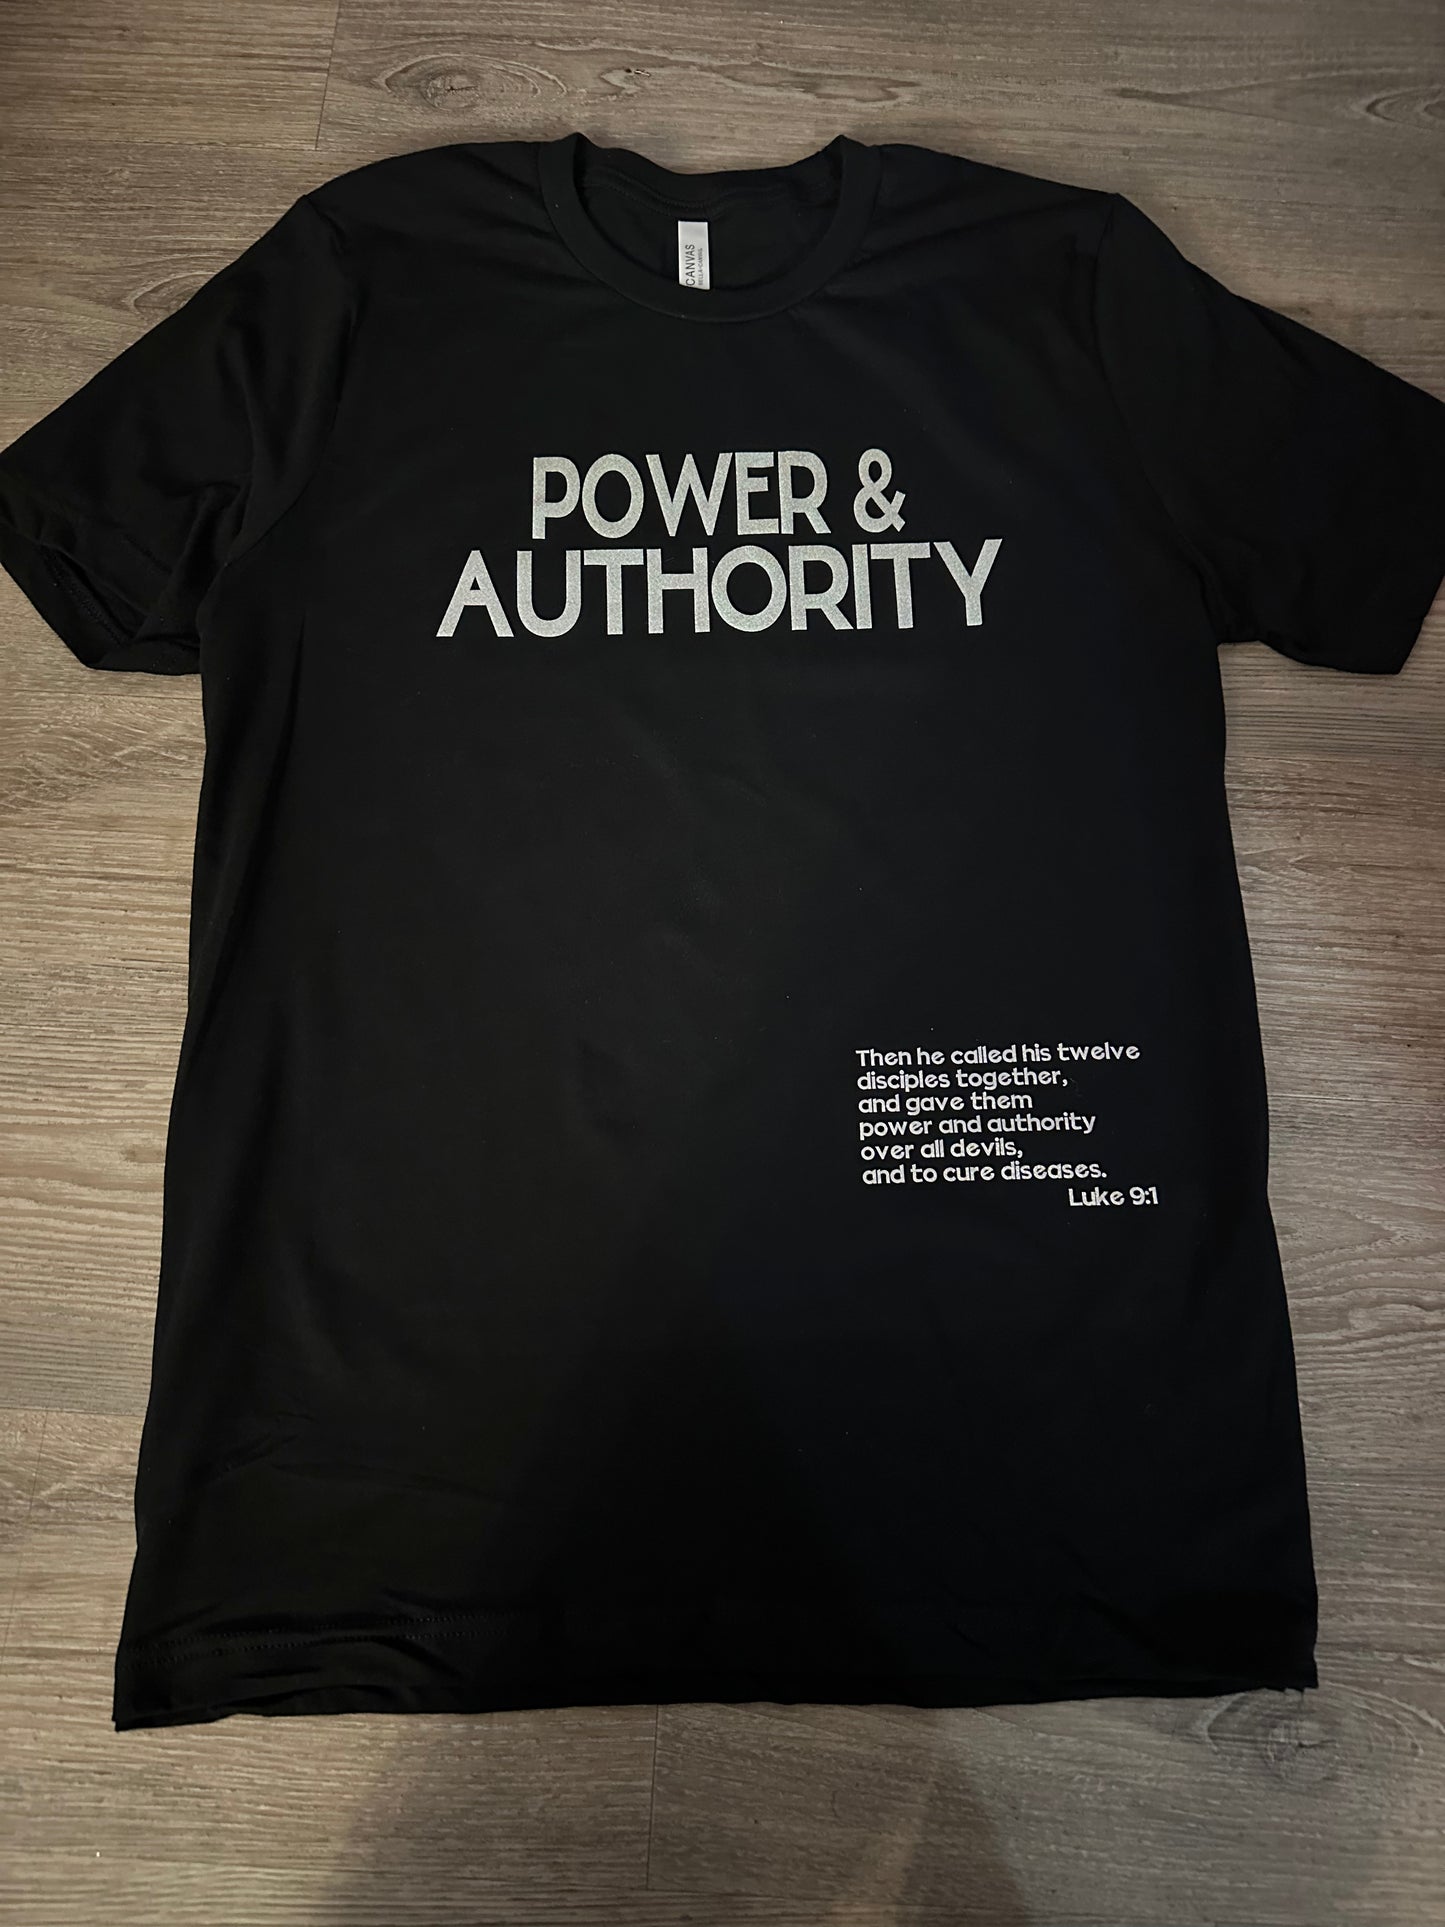 Power and Authority